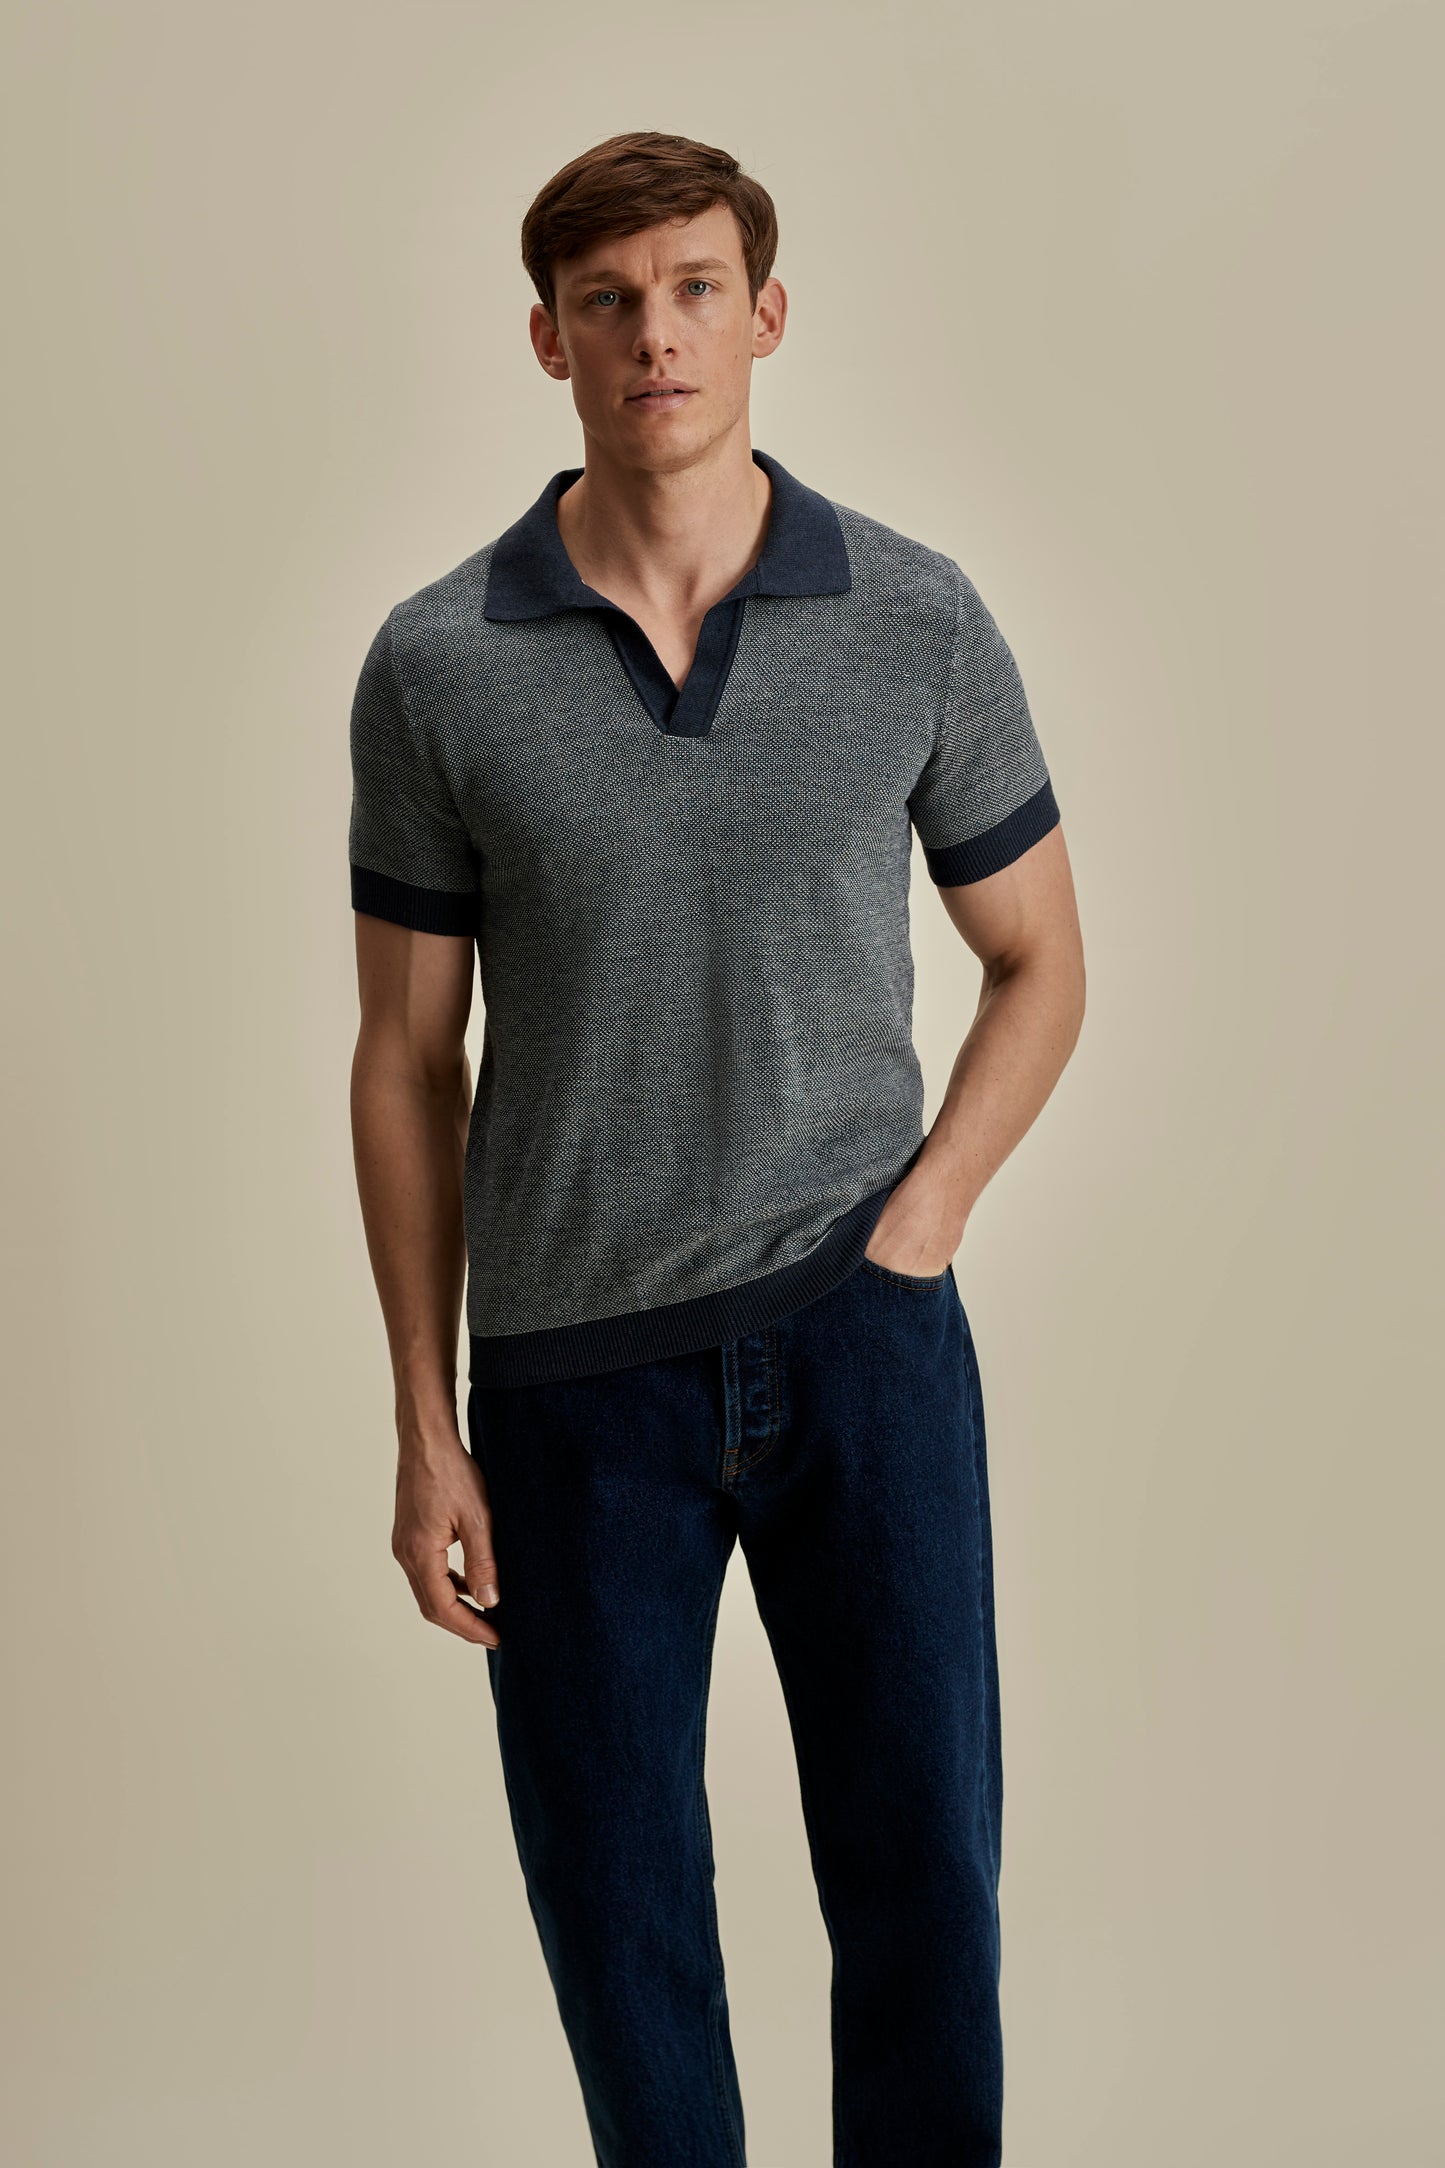 Cotton Linen Contrast Knitted Polo Shirt Dark Navy Mid Crop Model Image